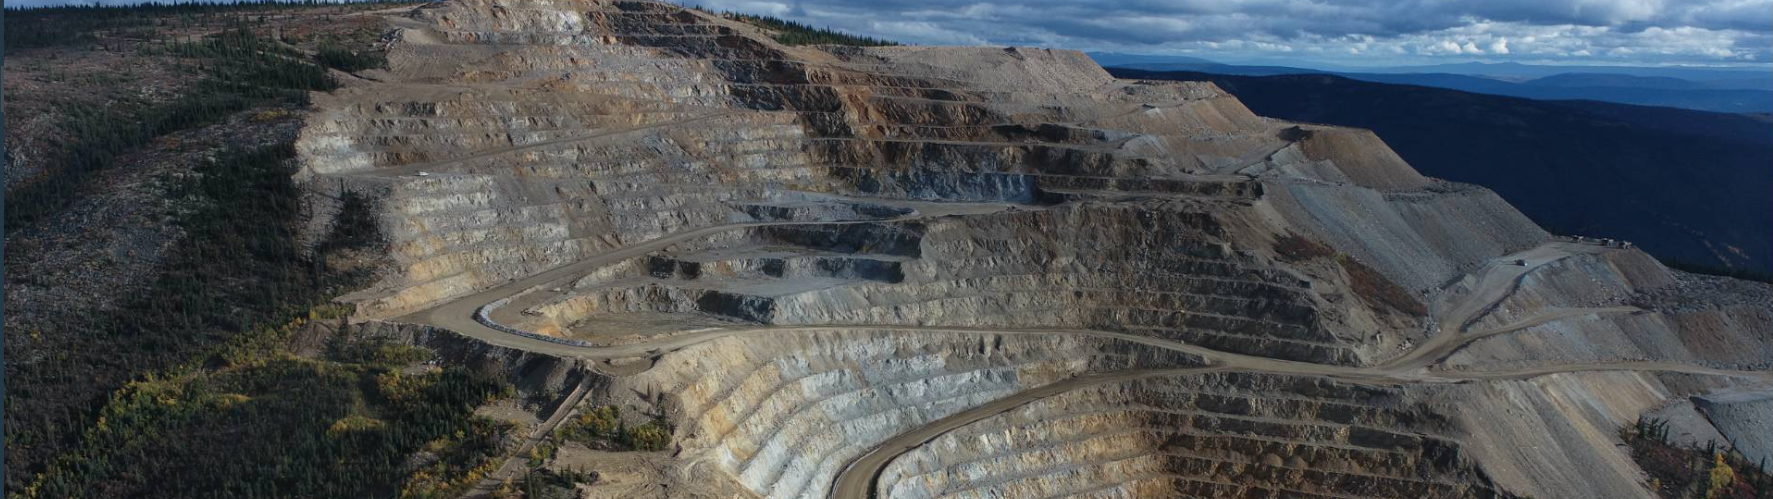 Victoria Gold Corp. Announces Acquisition of Yukon Assets